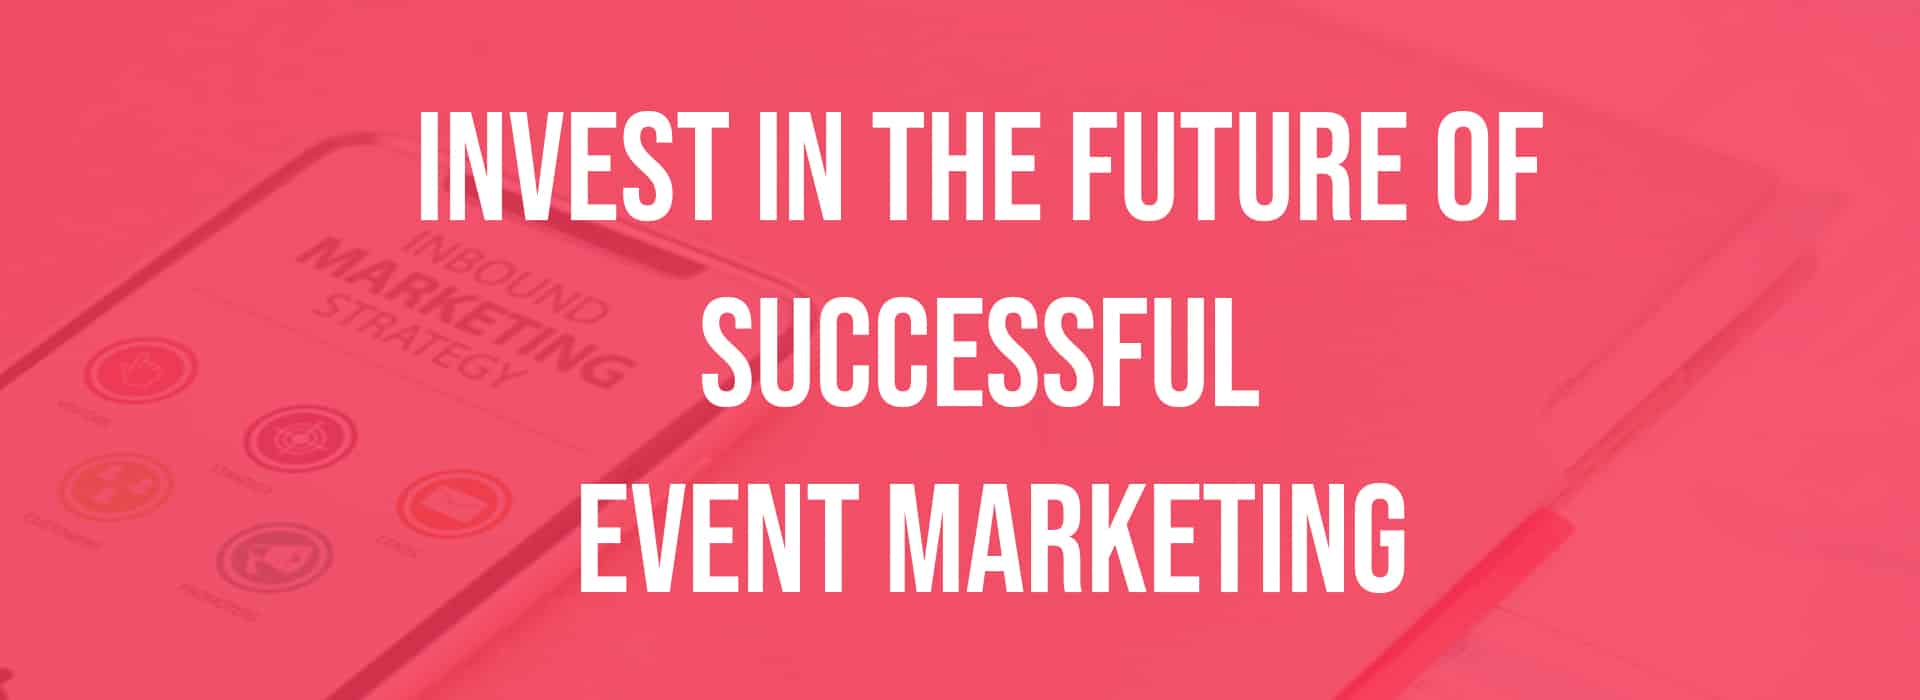 Invest in the Future of Successful Event Marketing